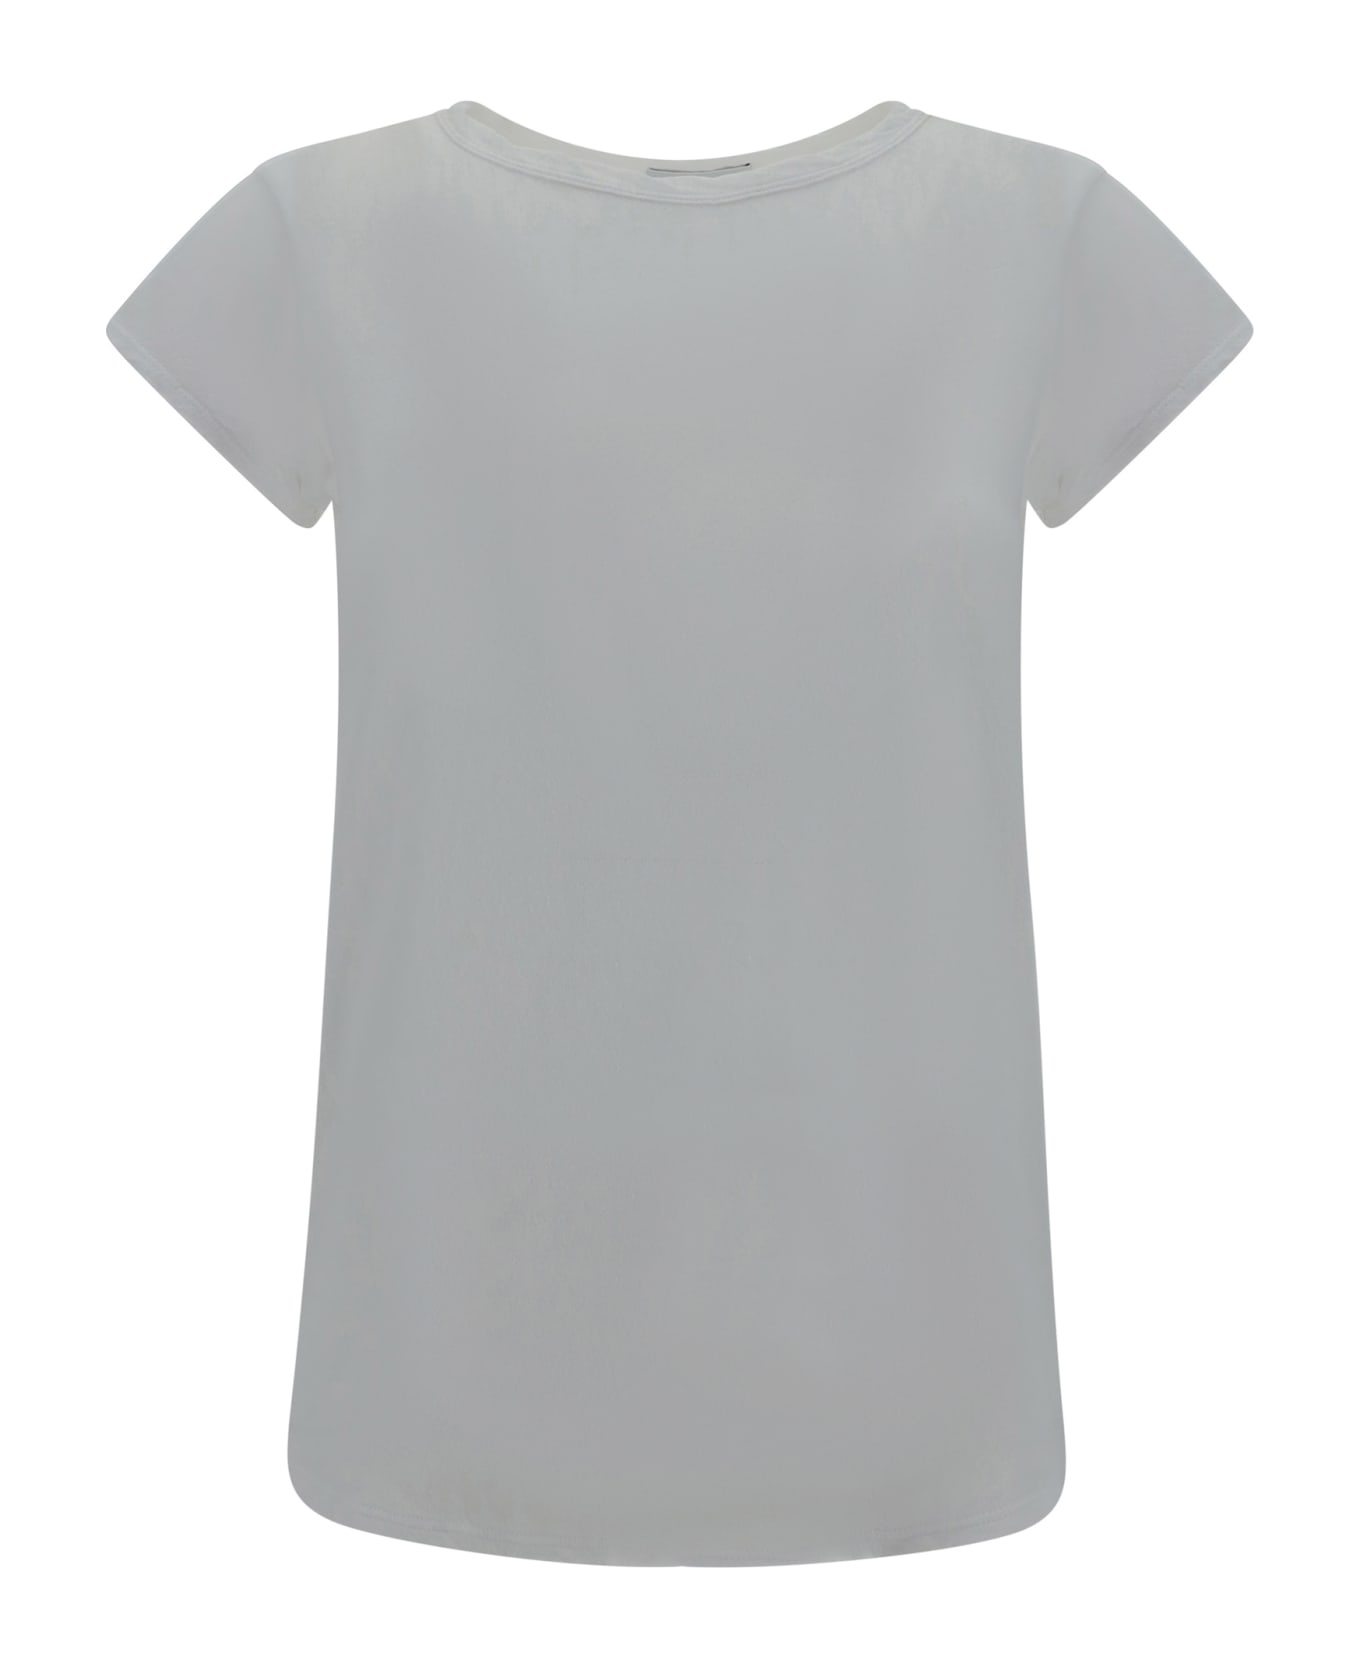 James Perse T-shirt - White Tシャツ